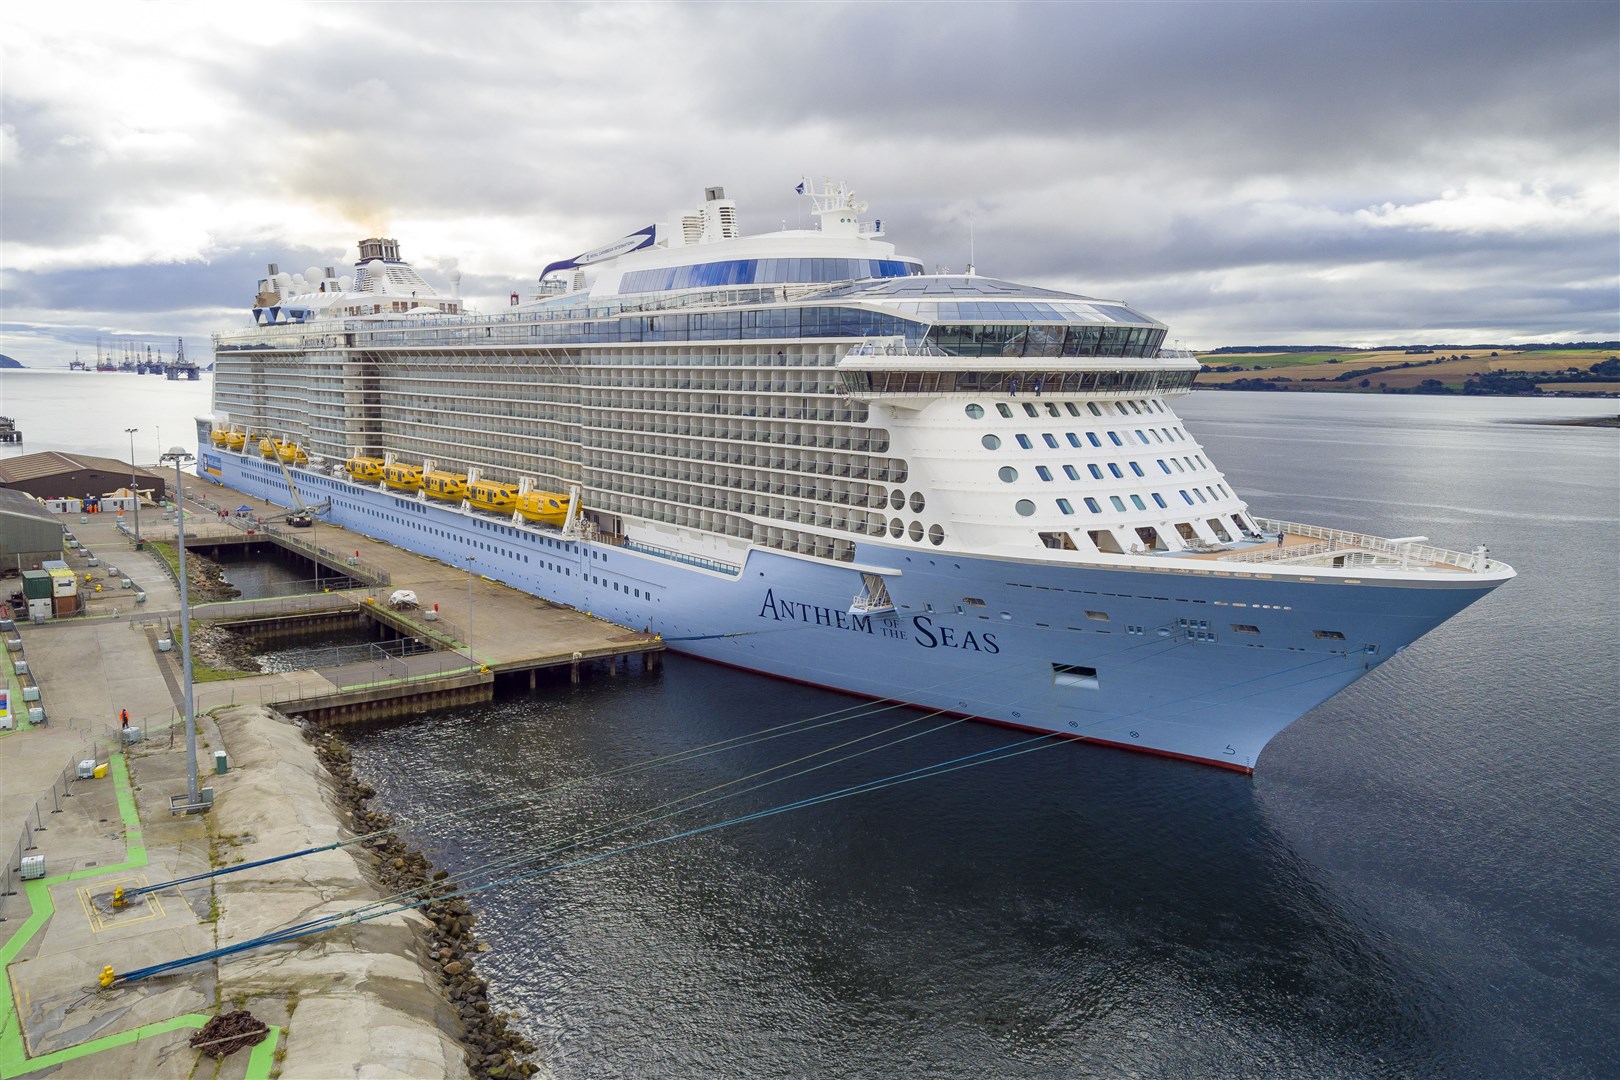 The Anthem of the Seas was among the vessels which brought cruise ship passnegers back to the Highlands after last year's enforced break.